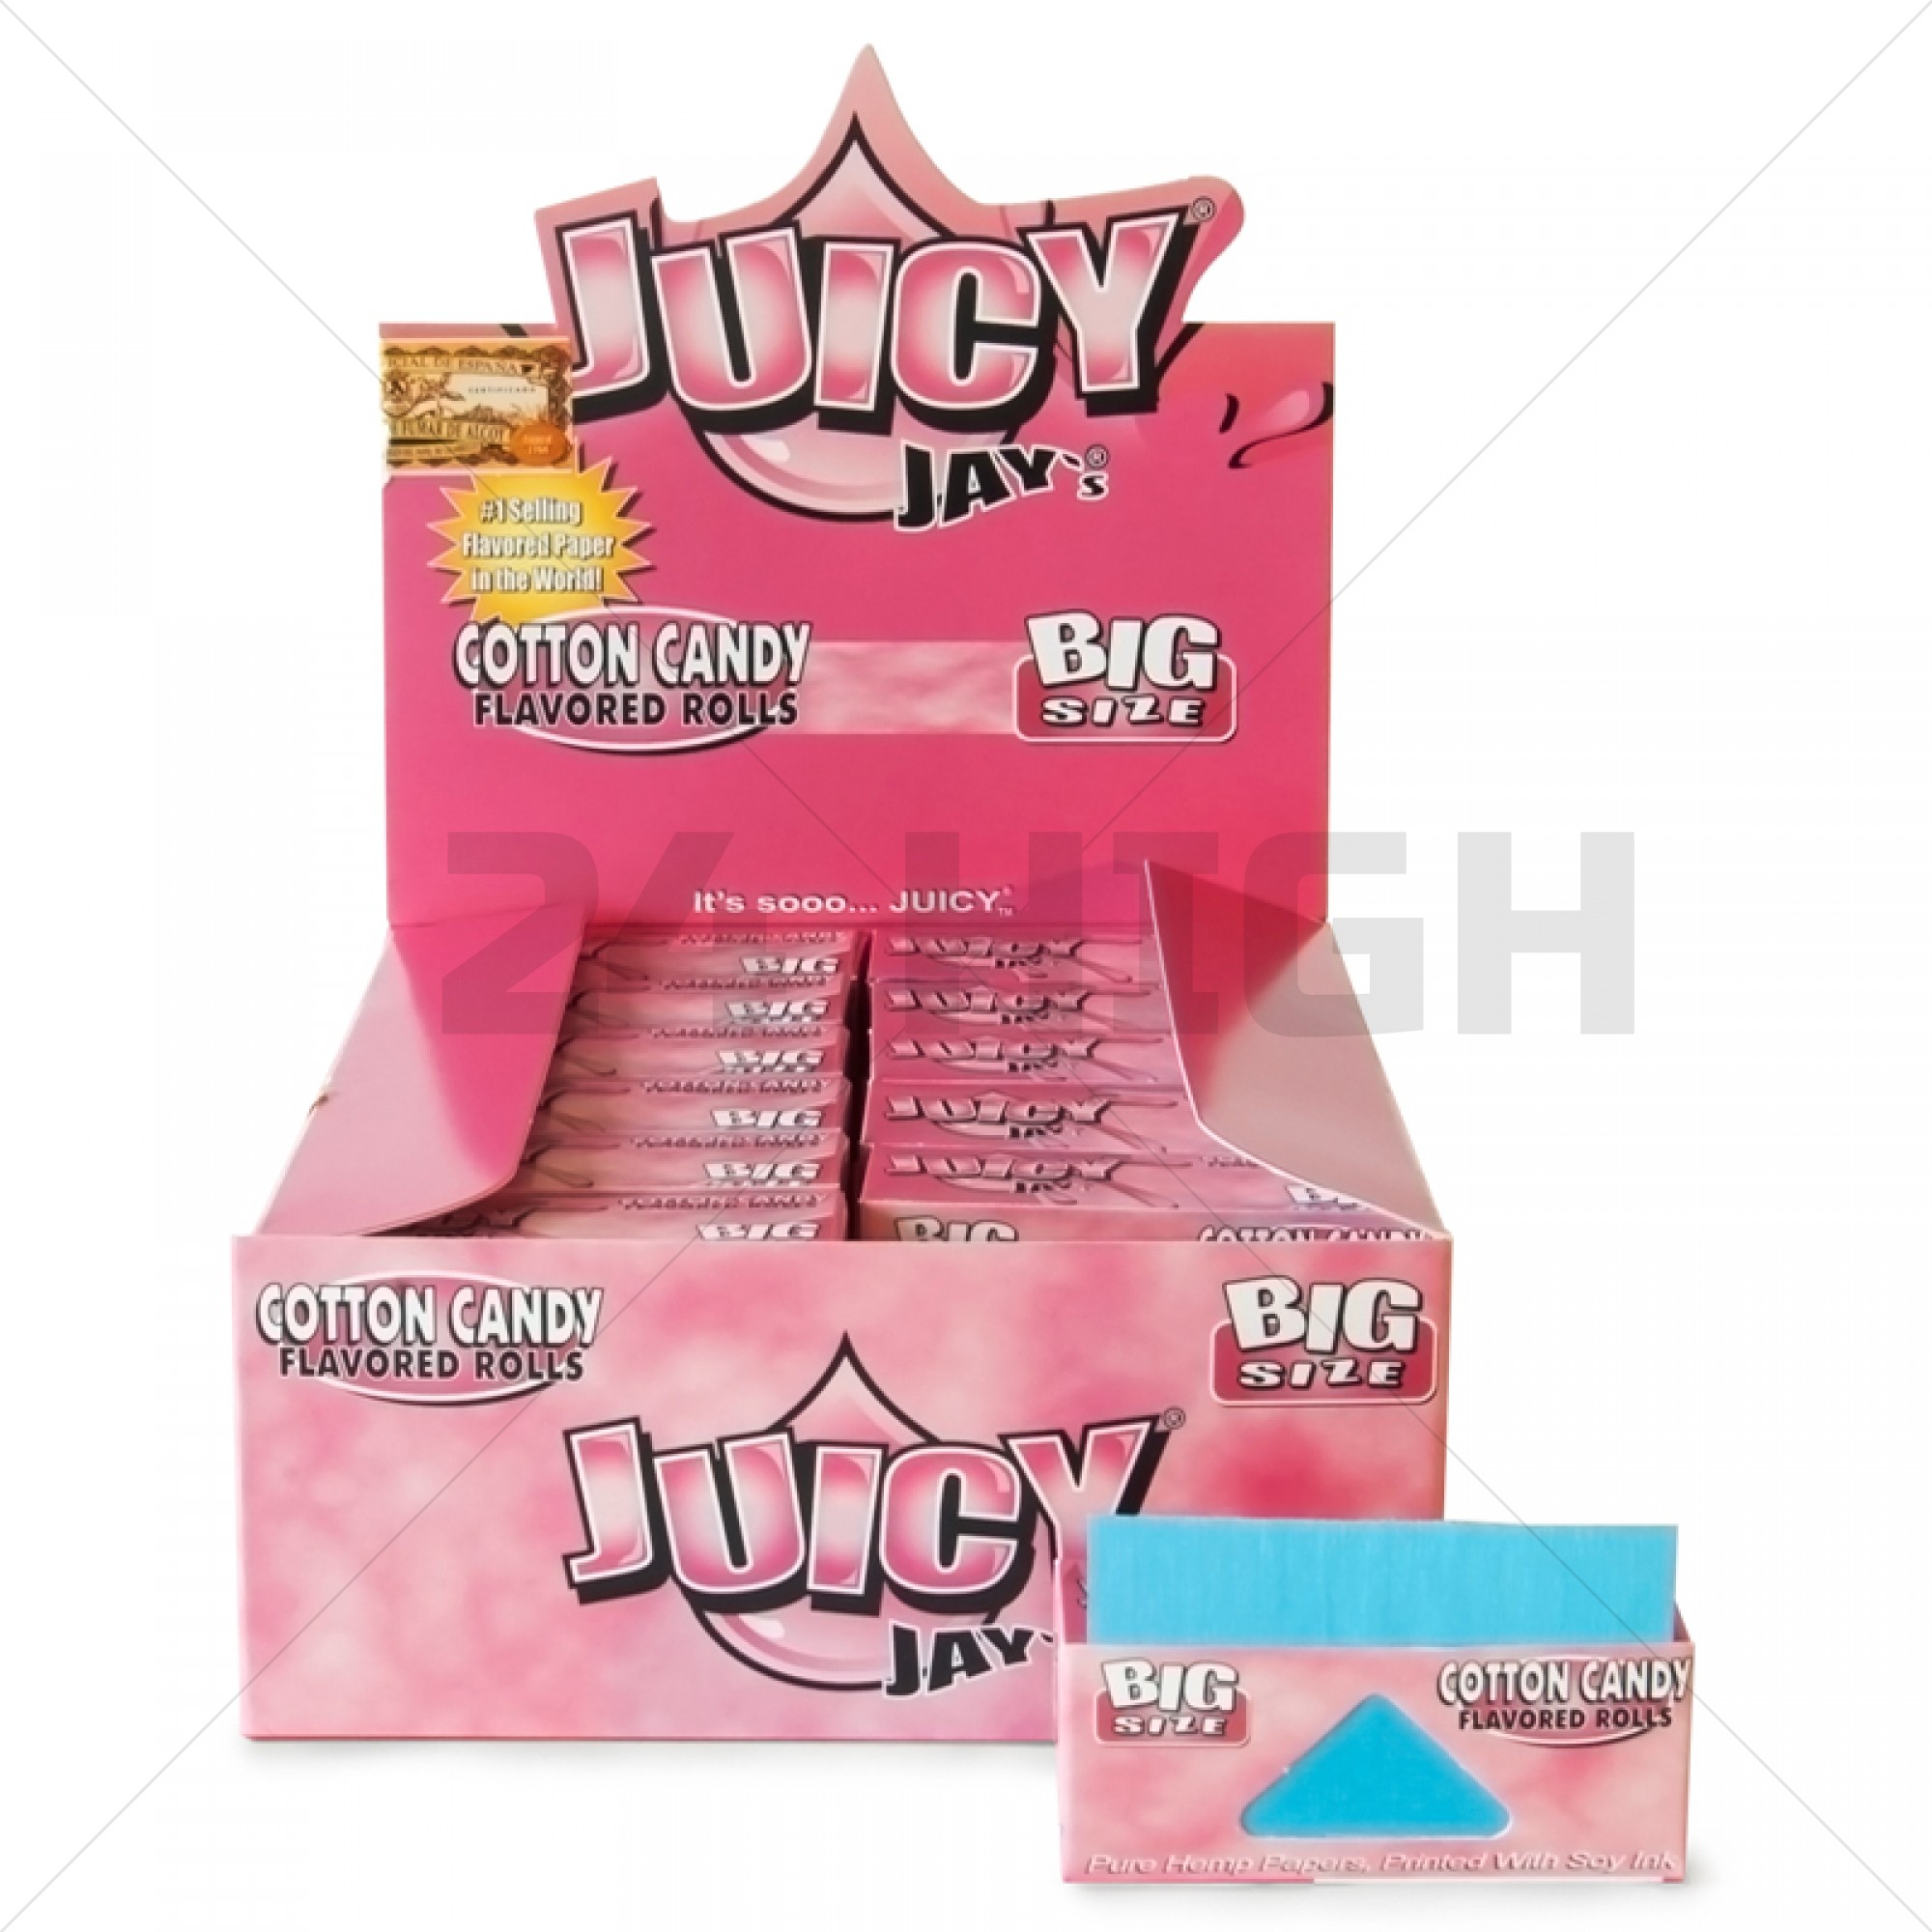 Juicy Jay's Cotton Candy On Roll